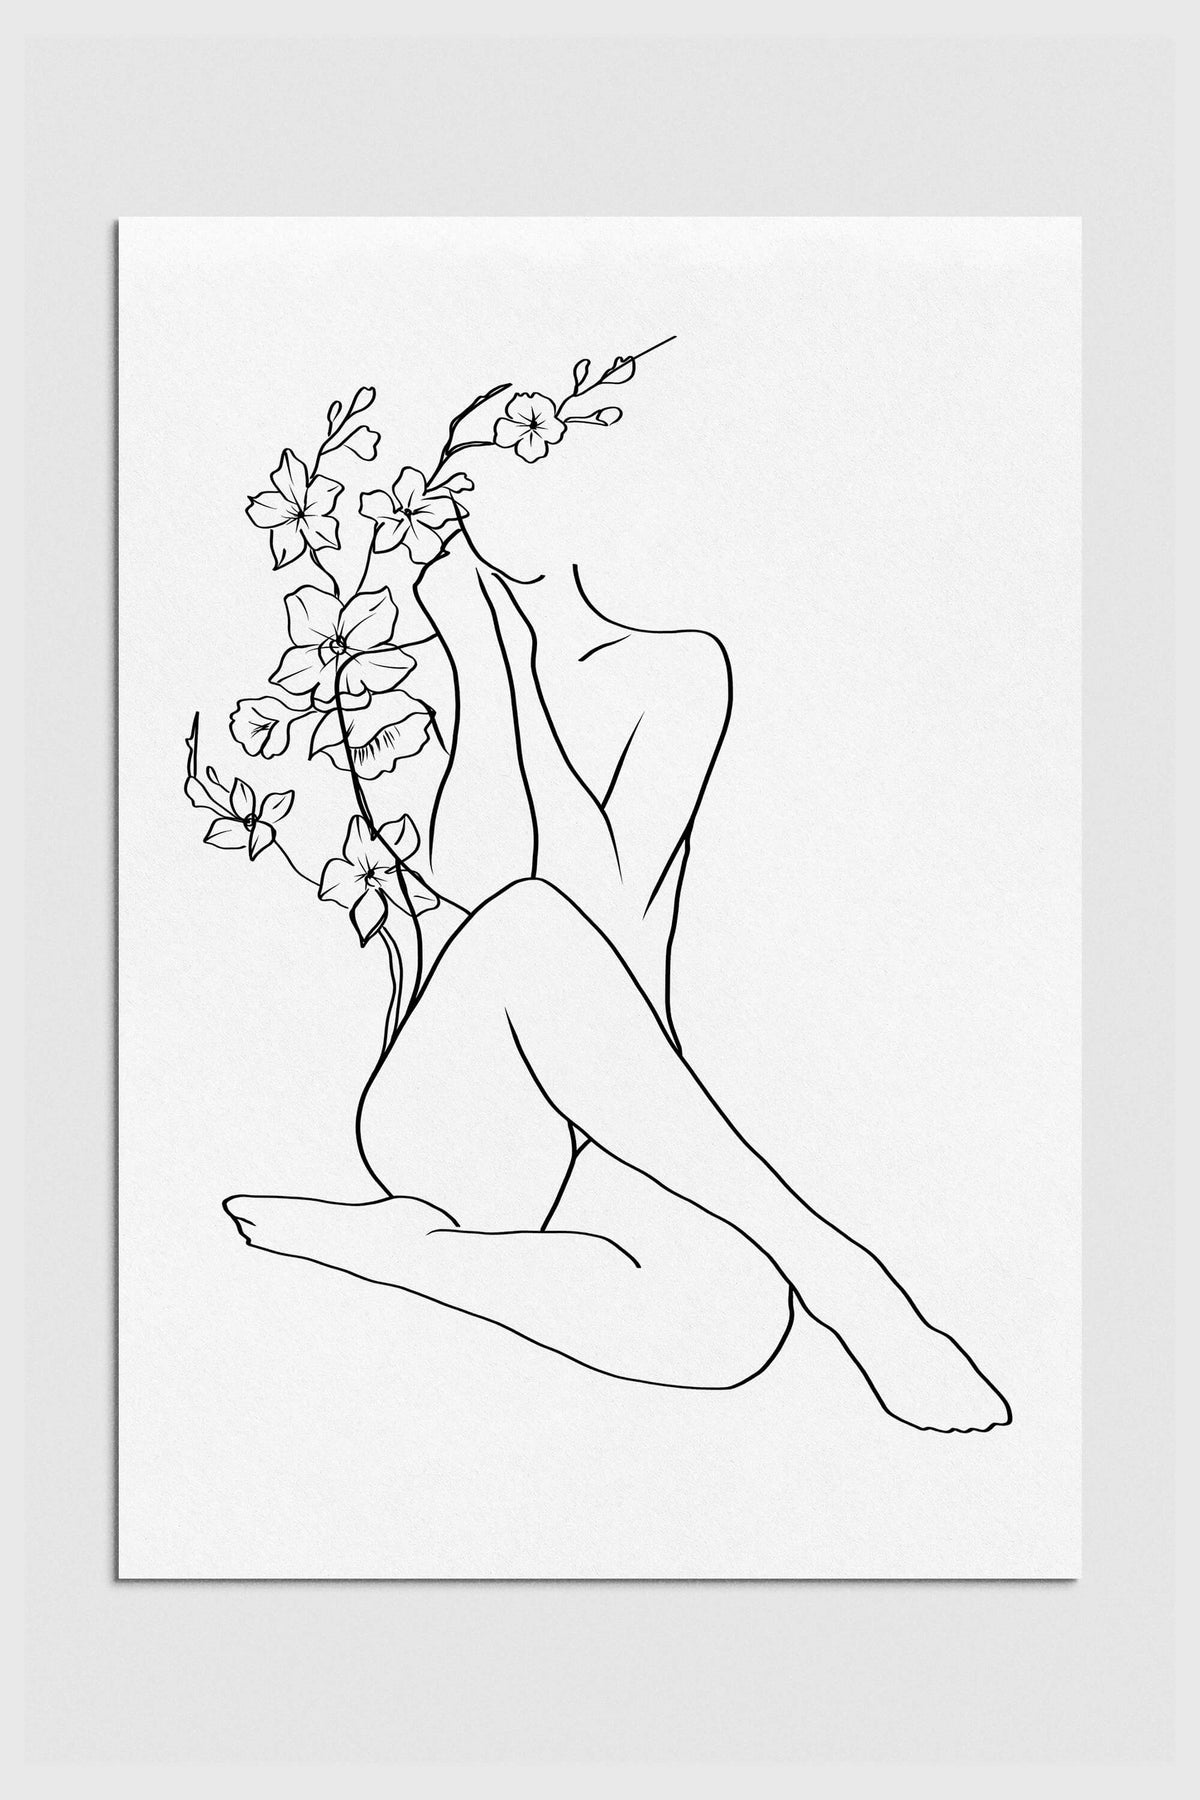 Abstract black and white woman's body drawing with botanical elements. Timeless elegance and self-expression captured in this monochrome wall art.